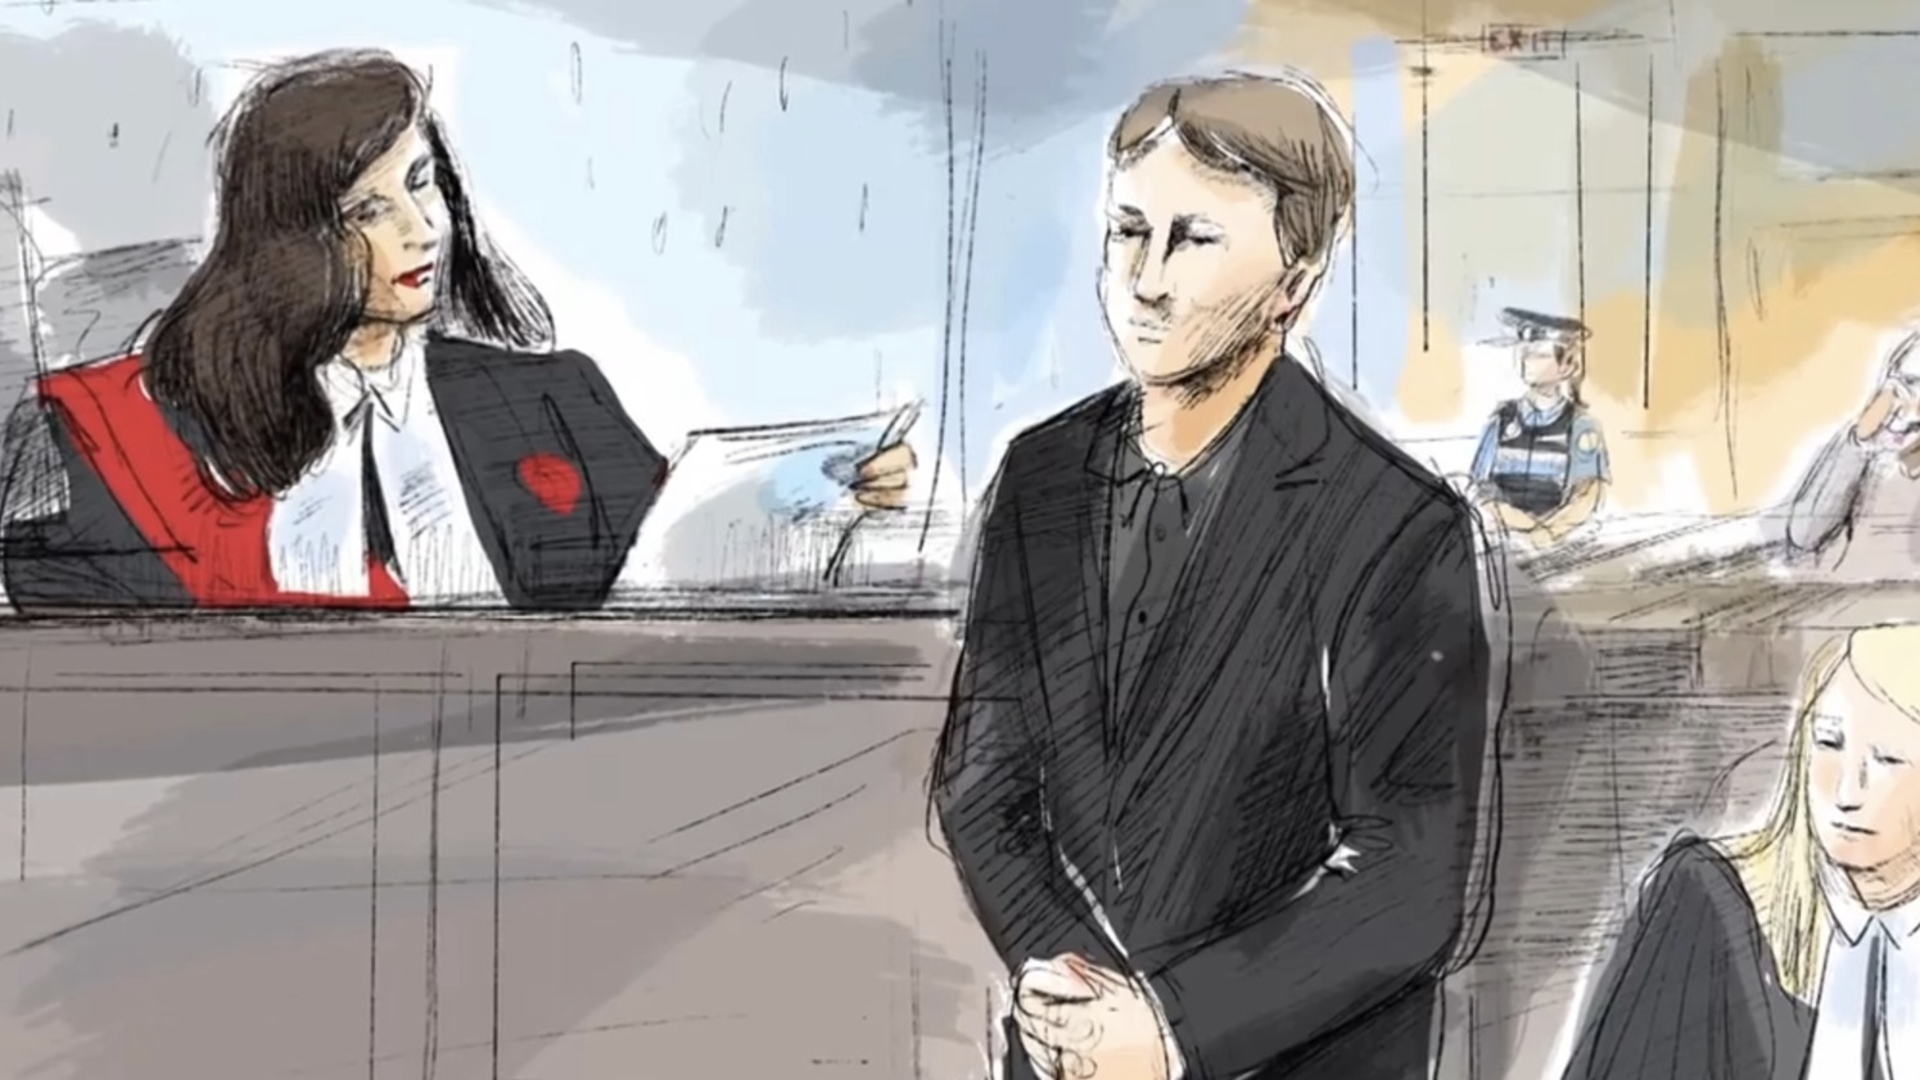 Nathaniel Veltman sentenced to life in prison for London attack